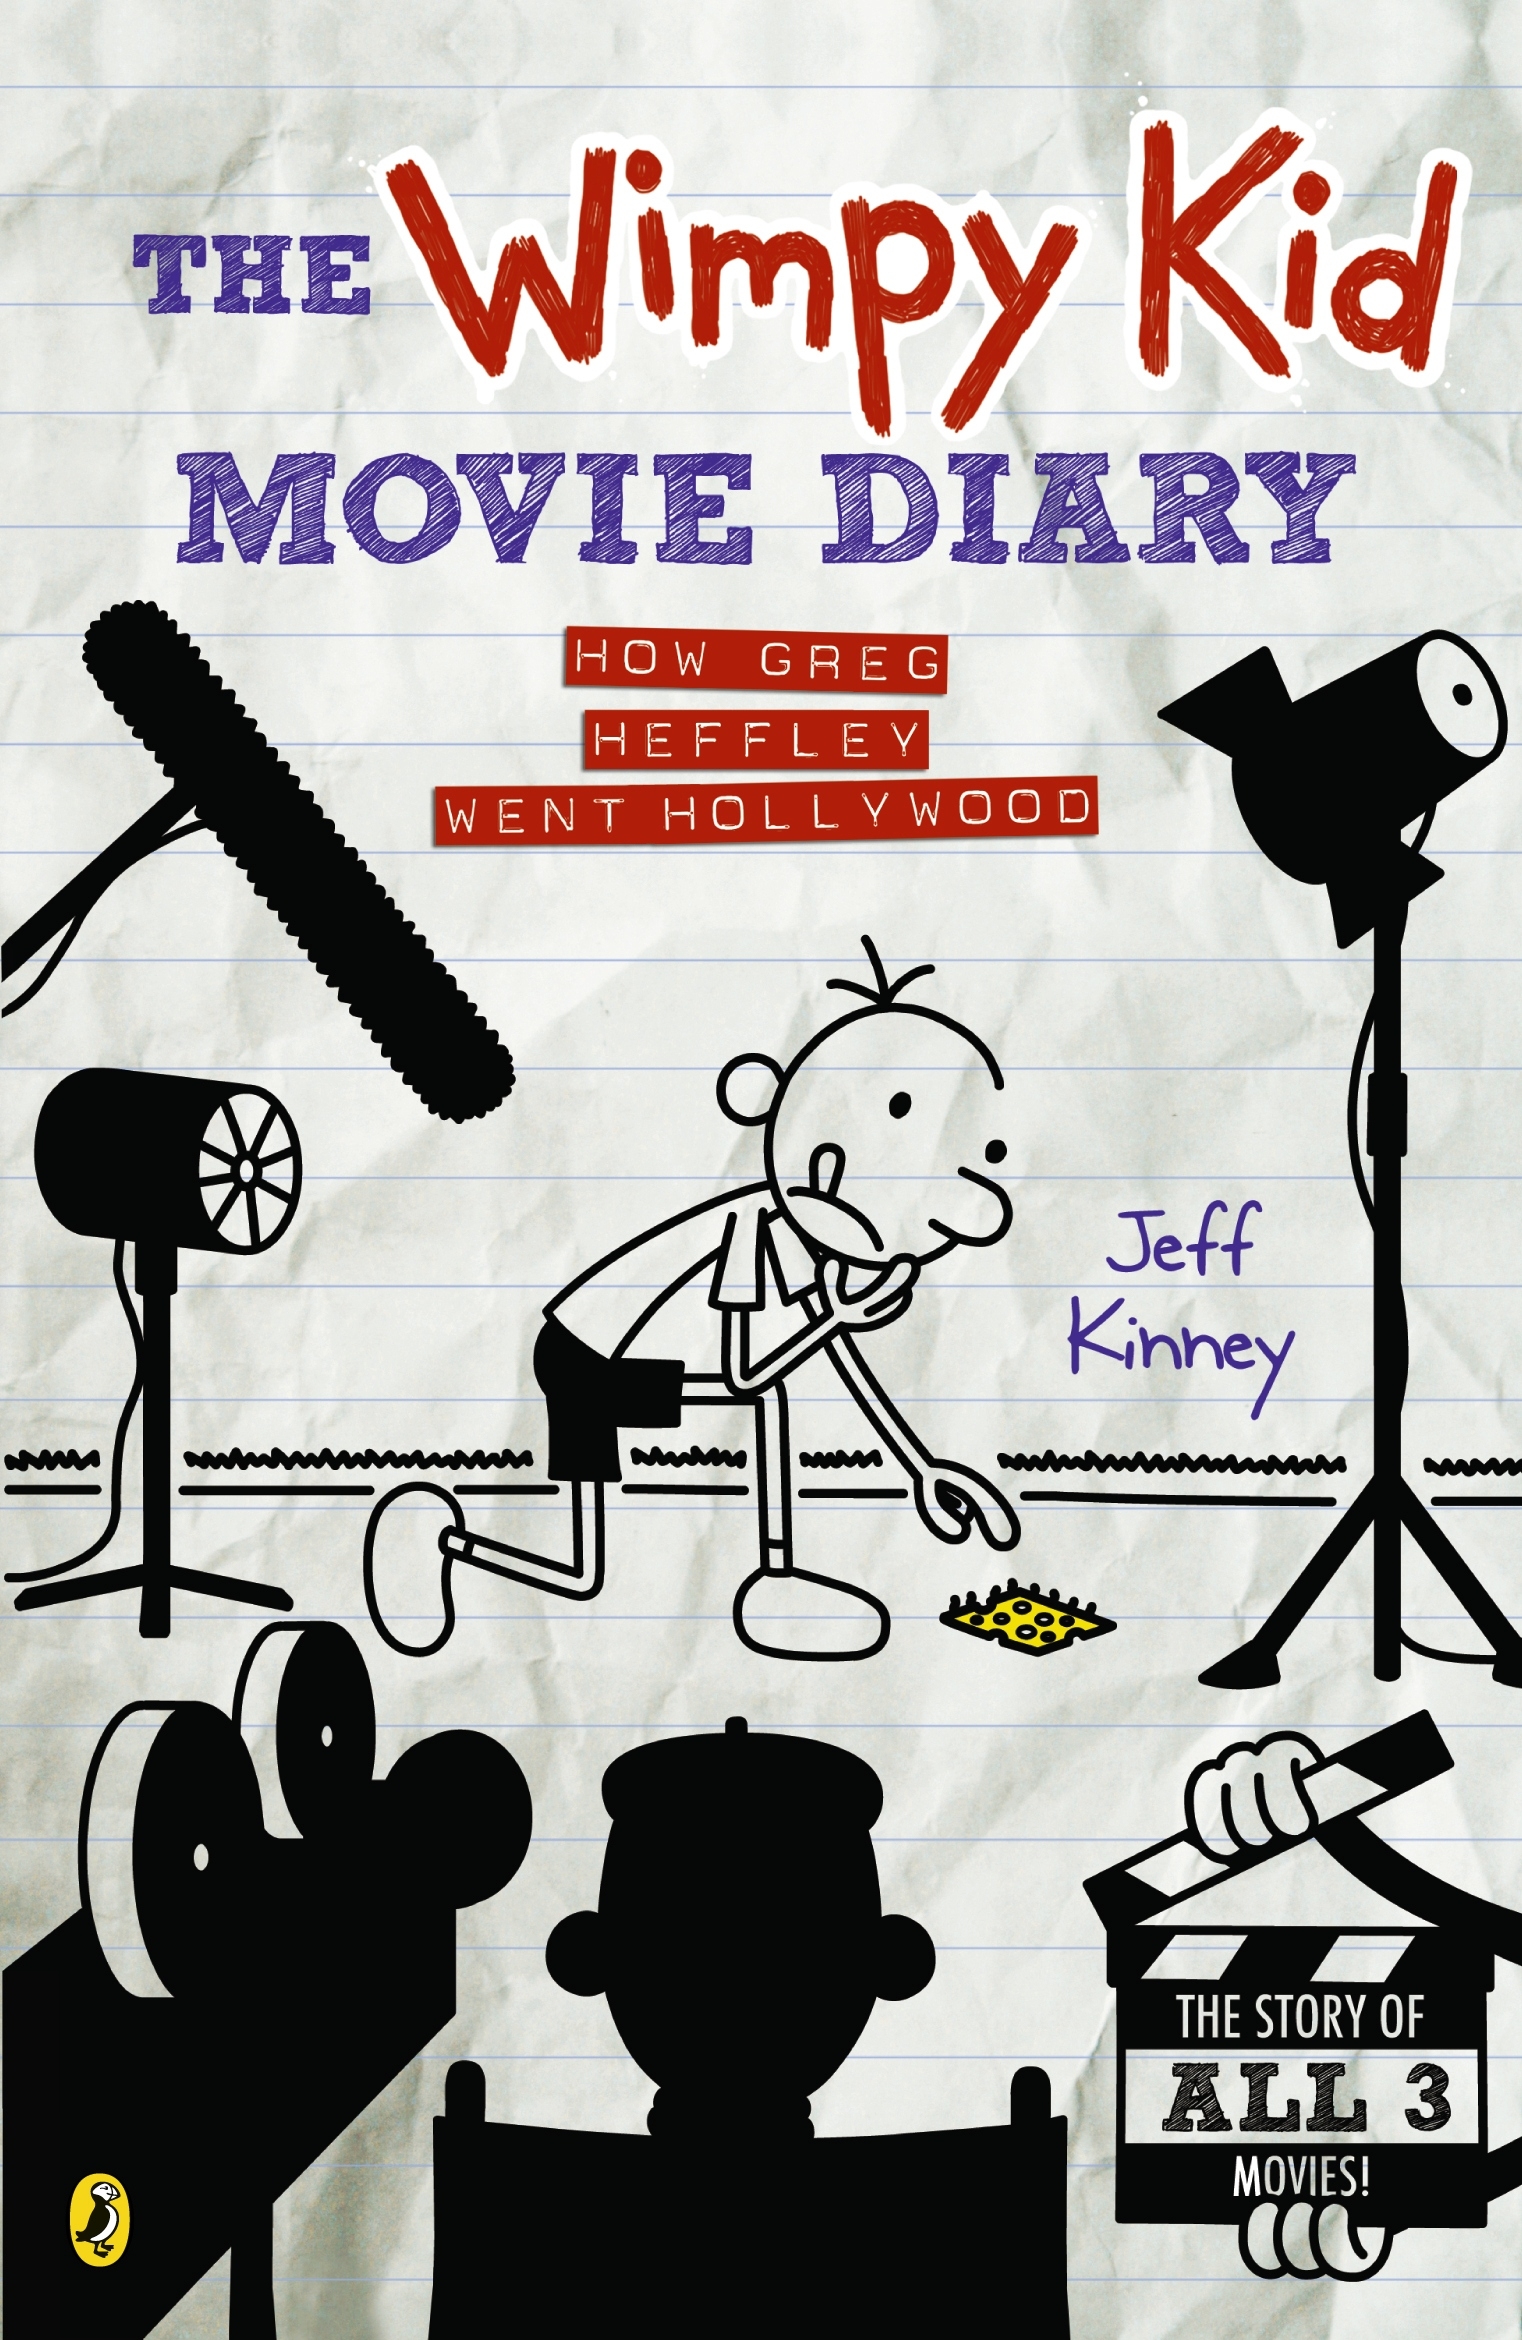 SIGNED Jeff Kinney Book Diary Of A Wimpy Kid : No Brainer First